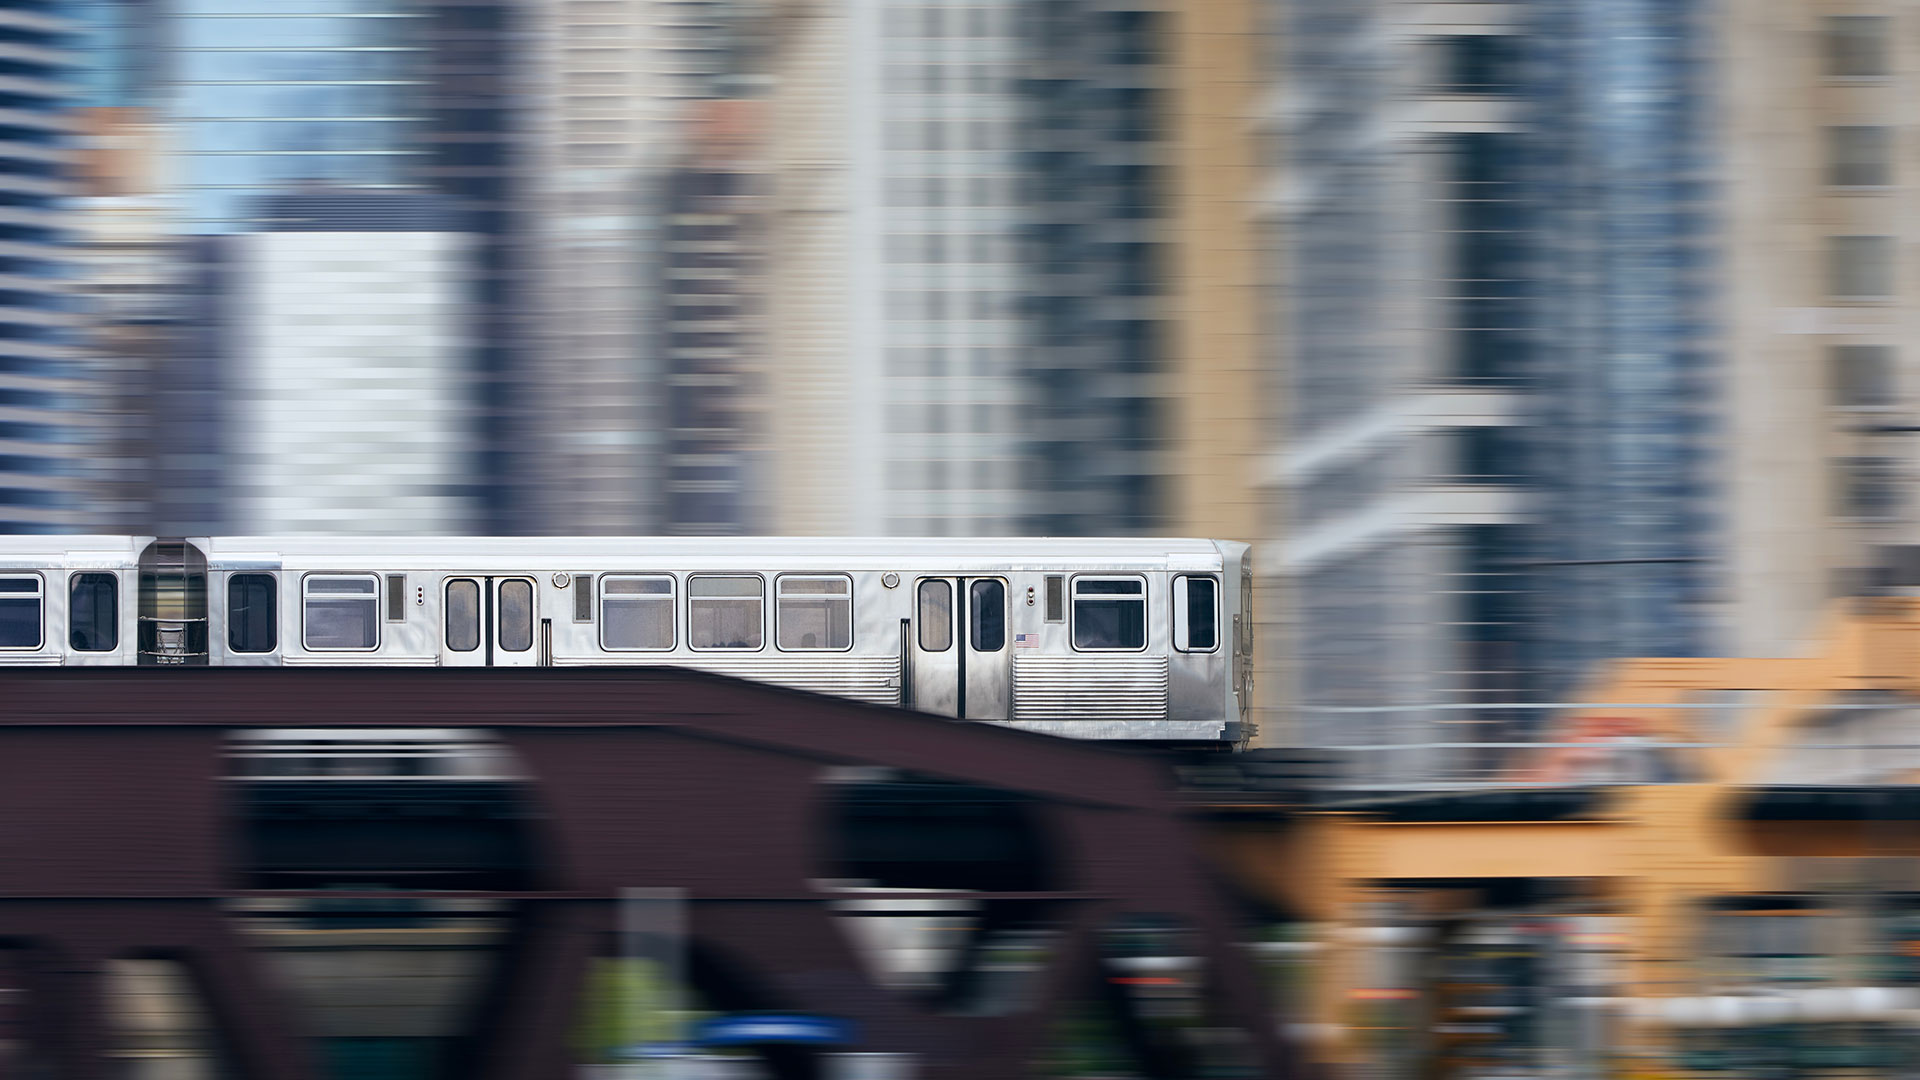 A silver CTA train seen in motion crossing a bridge. The rest of the image has a motion blur, but it appears there are city buildings zooming by.